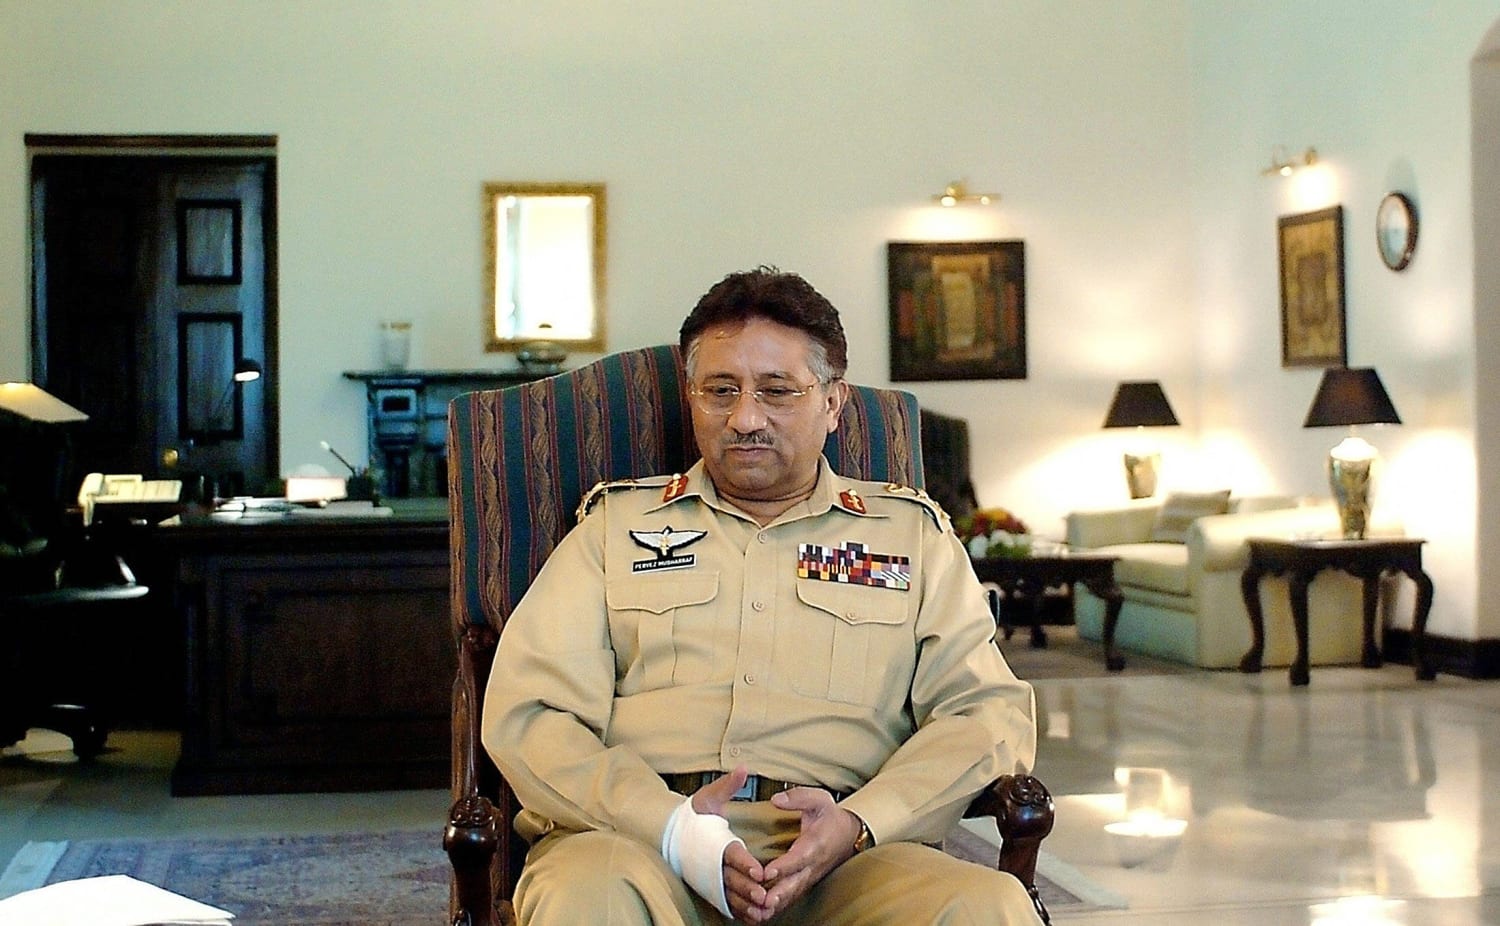 When we raised the border control problem, President Musharraf offered to place landmines in the frontier tribal areas – something he had already said to the media – knowing full well how we would react, given the Ottawa convention banning anti-personnel landmines.